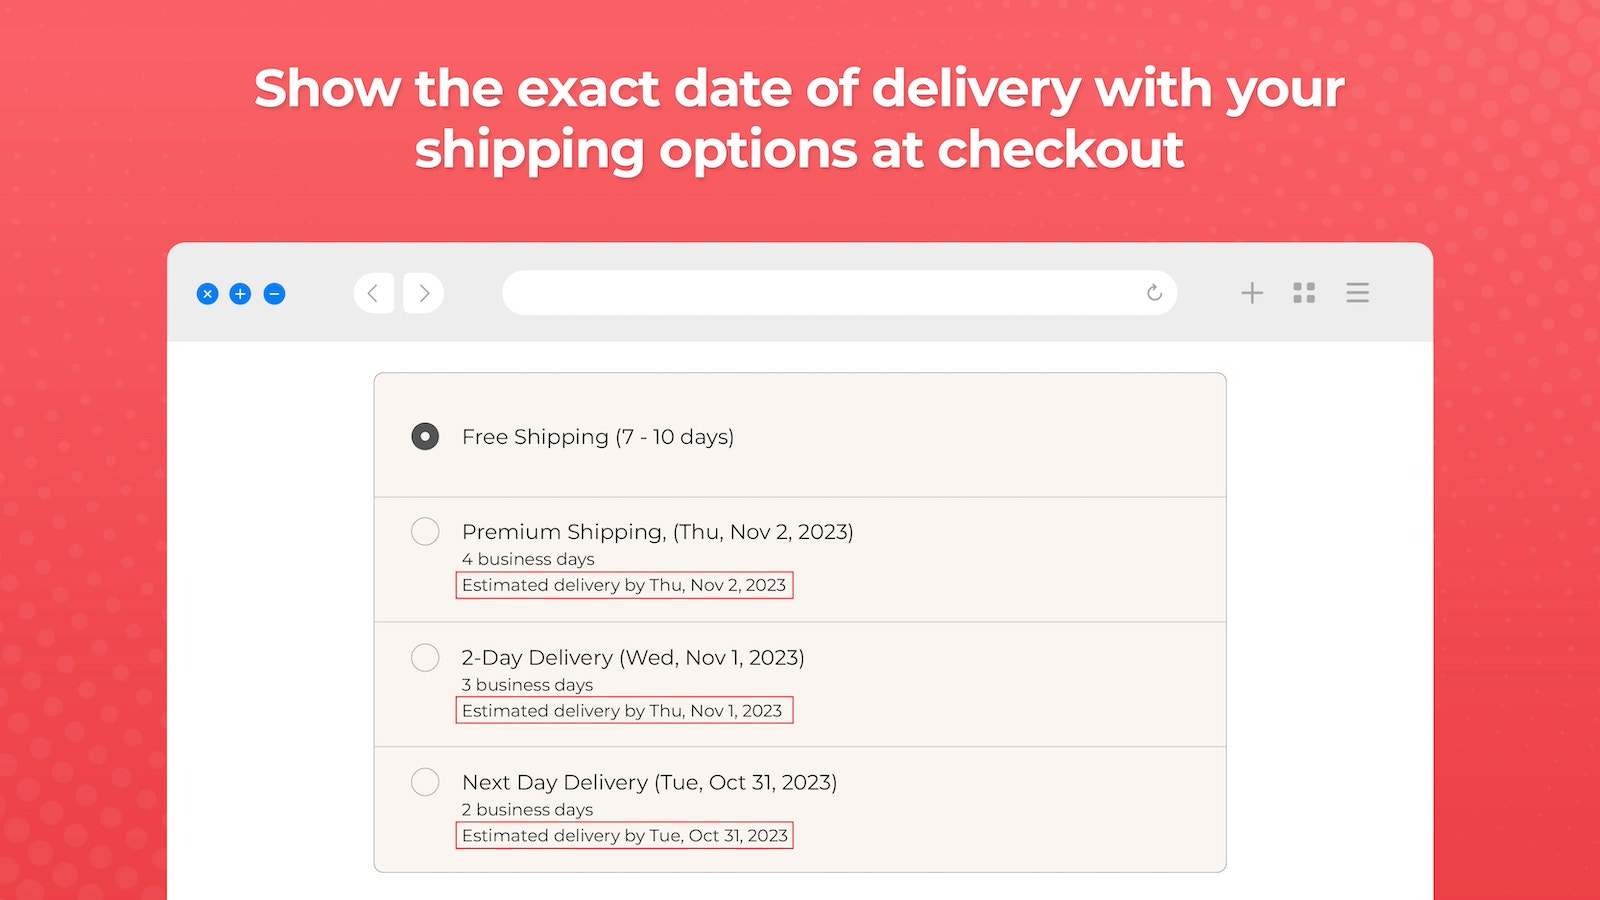 Show the exact date of delivery with your shipping options